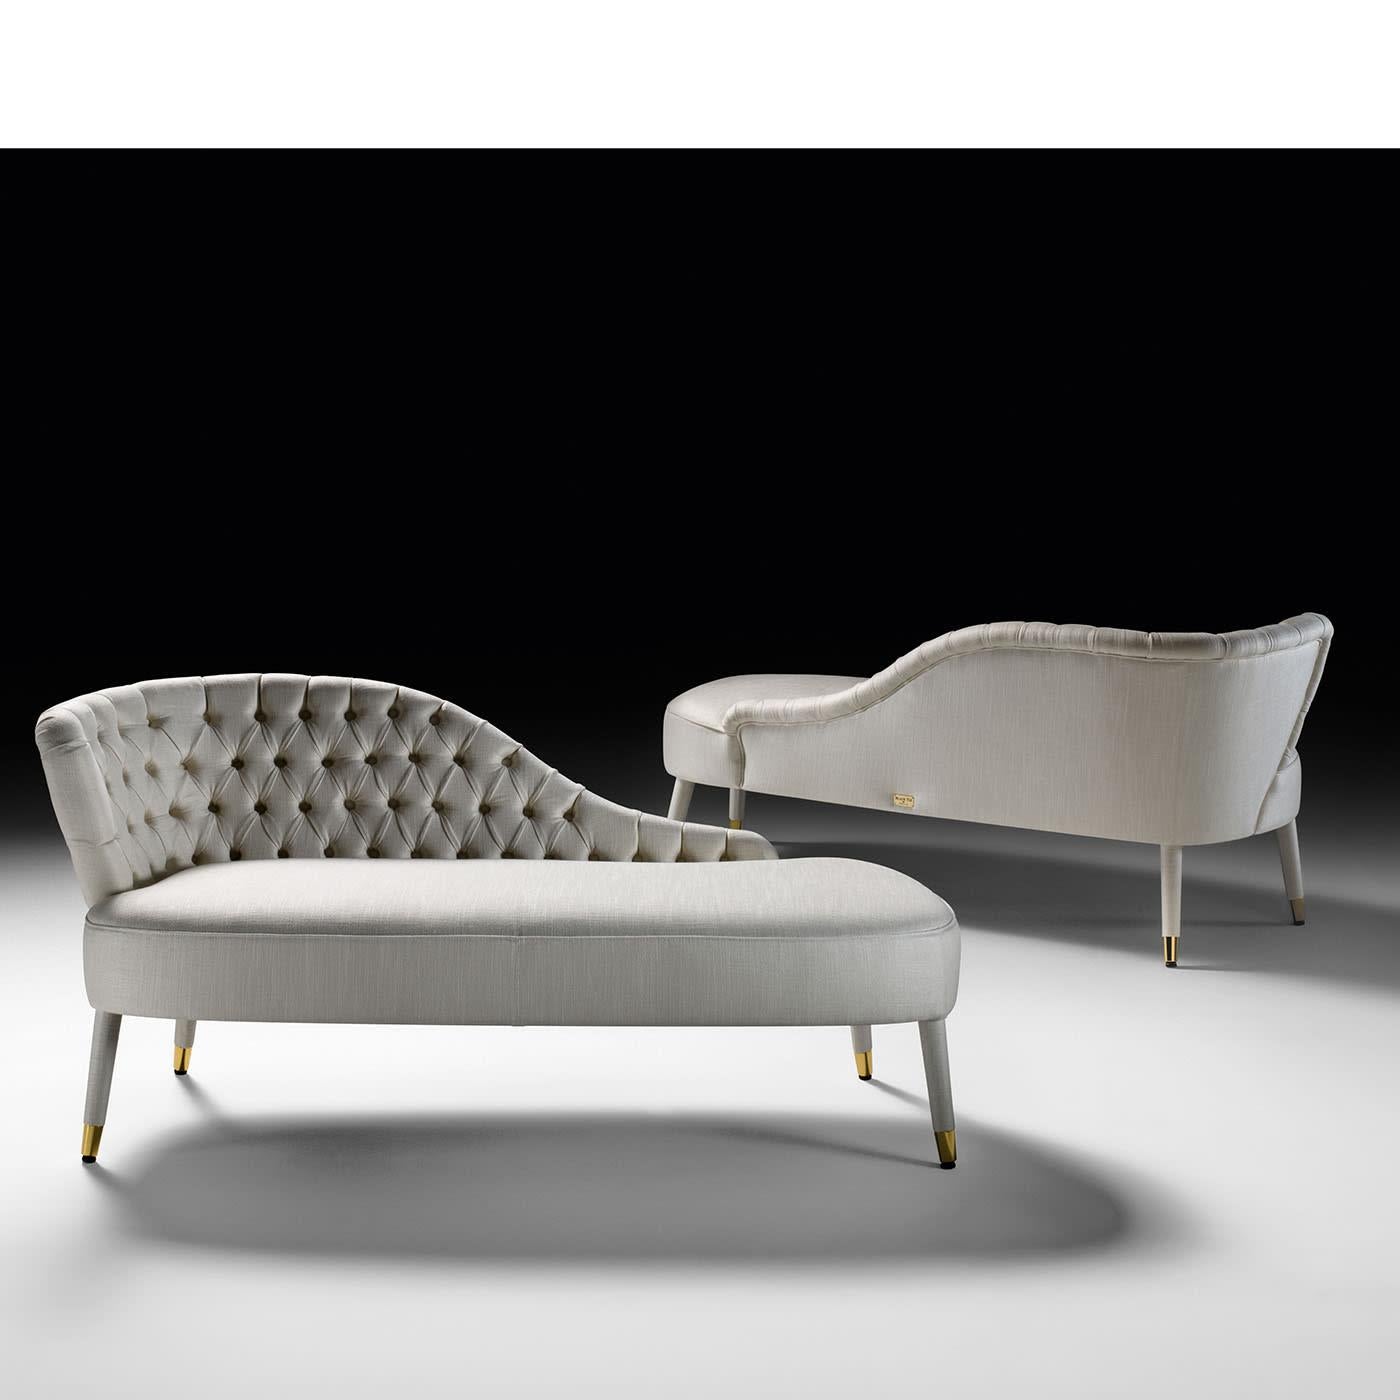 A sinuous wave outlining a backrest marked by a sublime handcrafted design lends this sofa its distinctive seductive asymmetrical look. Brimming with sartorial charm, its beech structure gets complemented by a generously expanded polyurethane